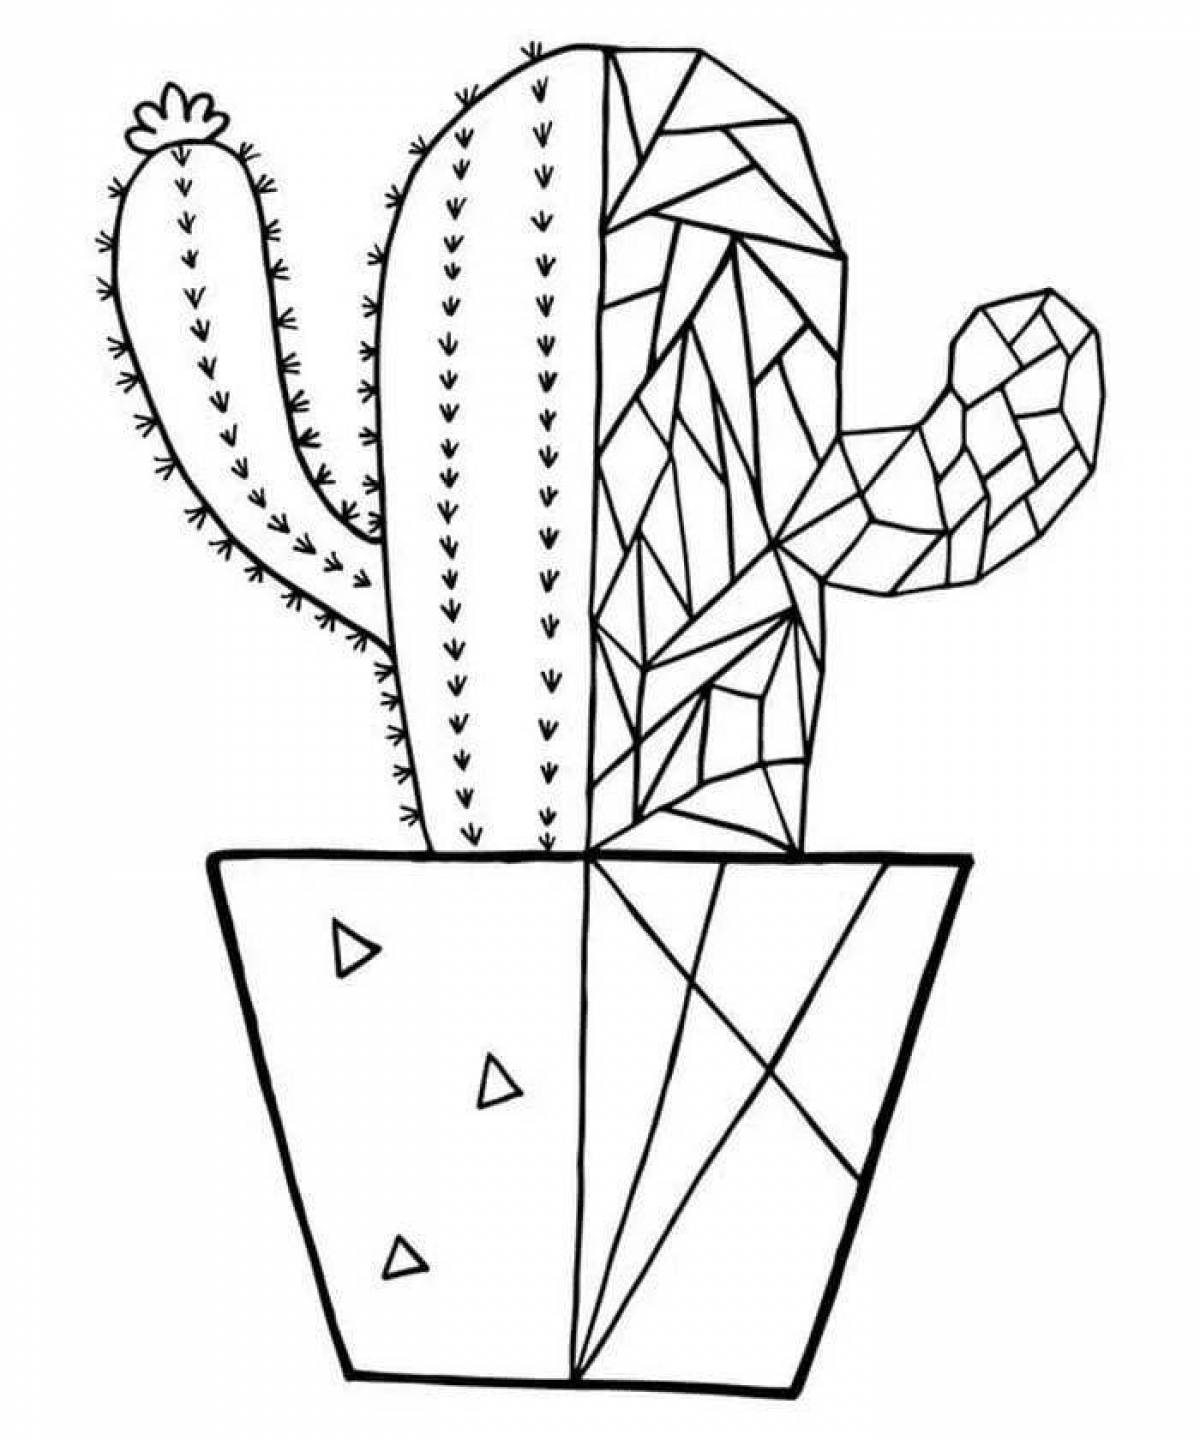 Cactus live coloring page